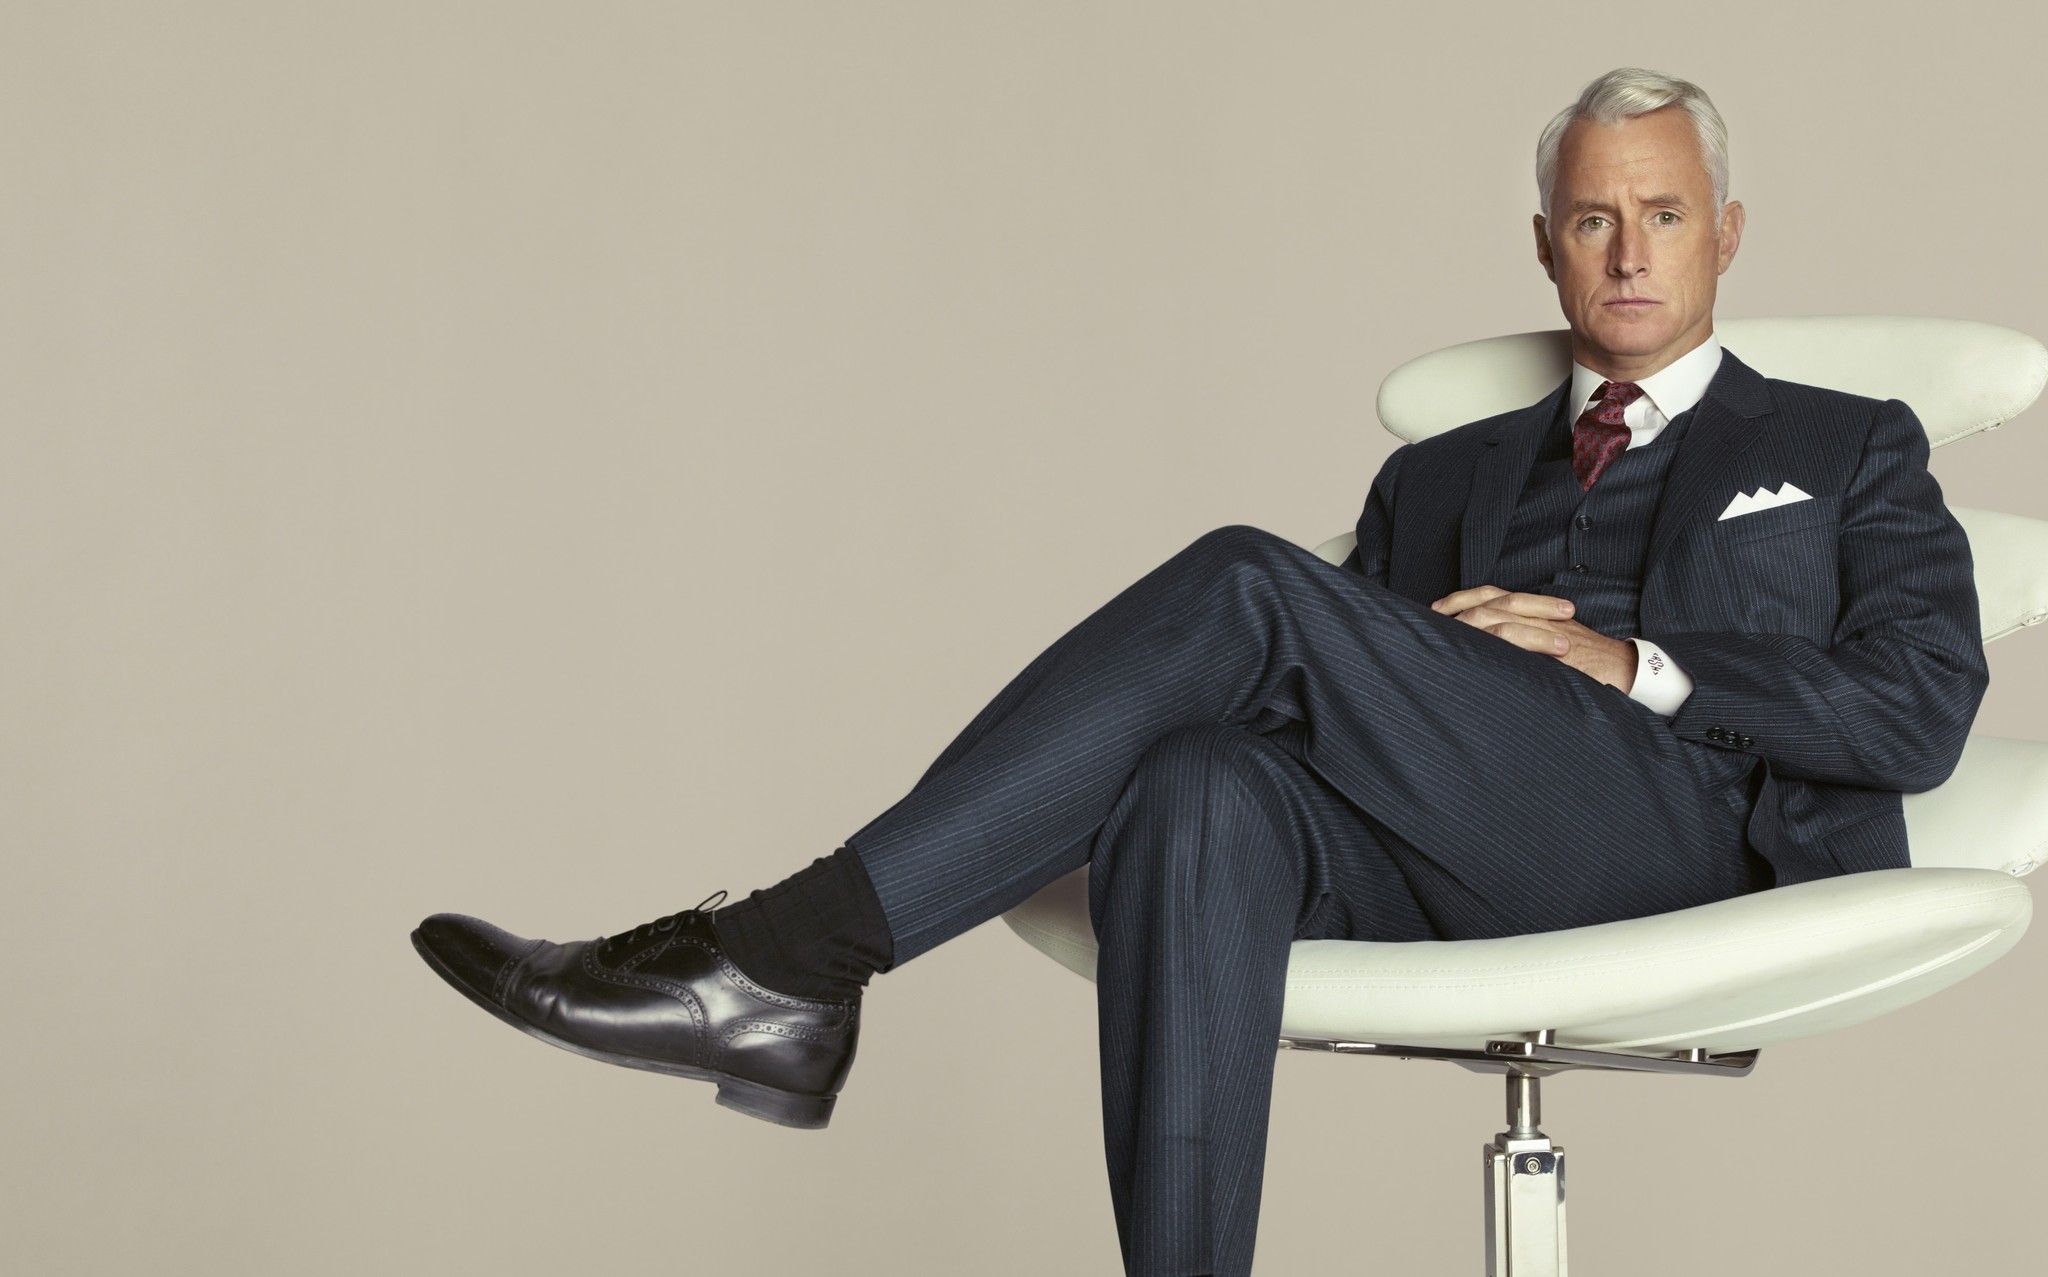 5 Television Bosses We Would Love To Work For (And 5 We Wouldn’t)